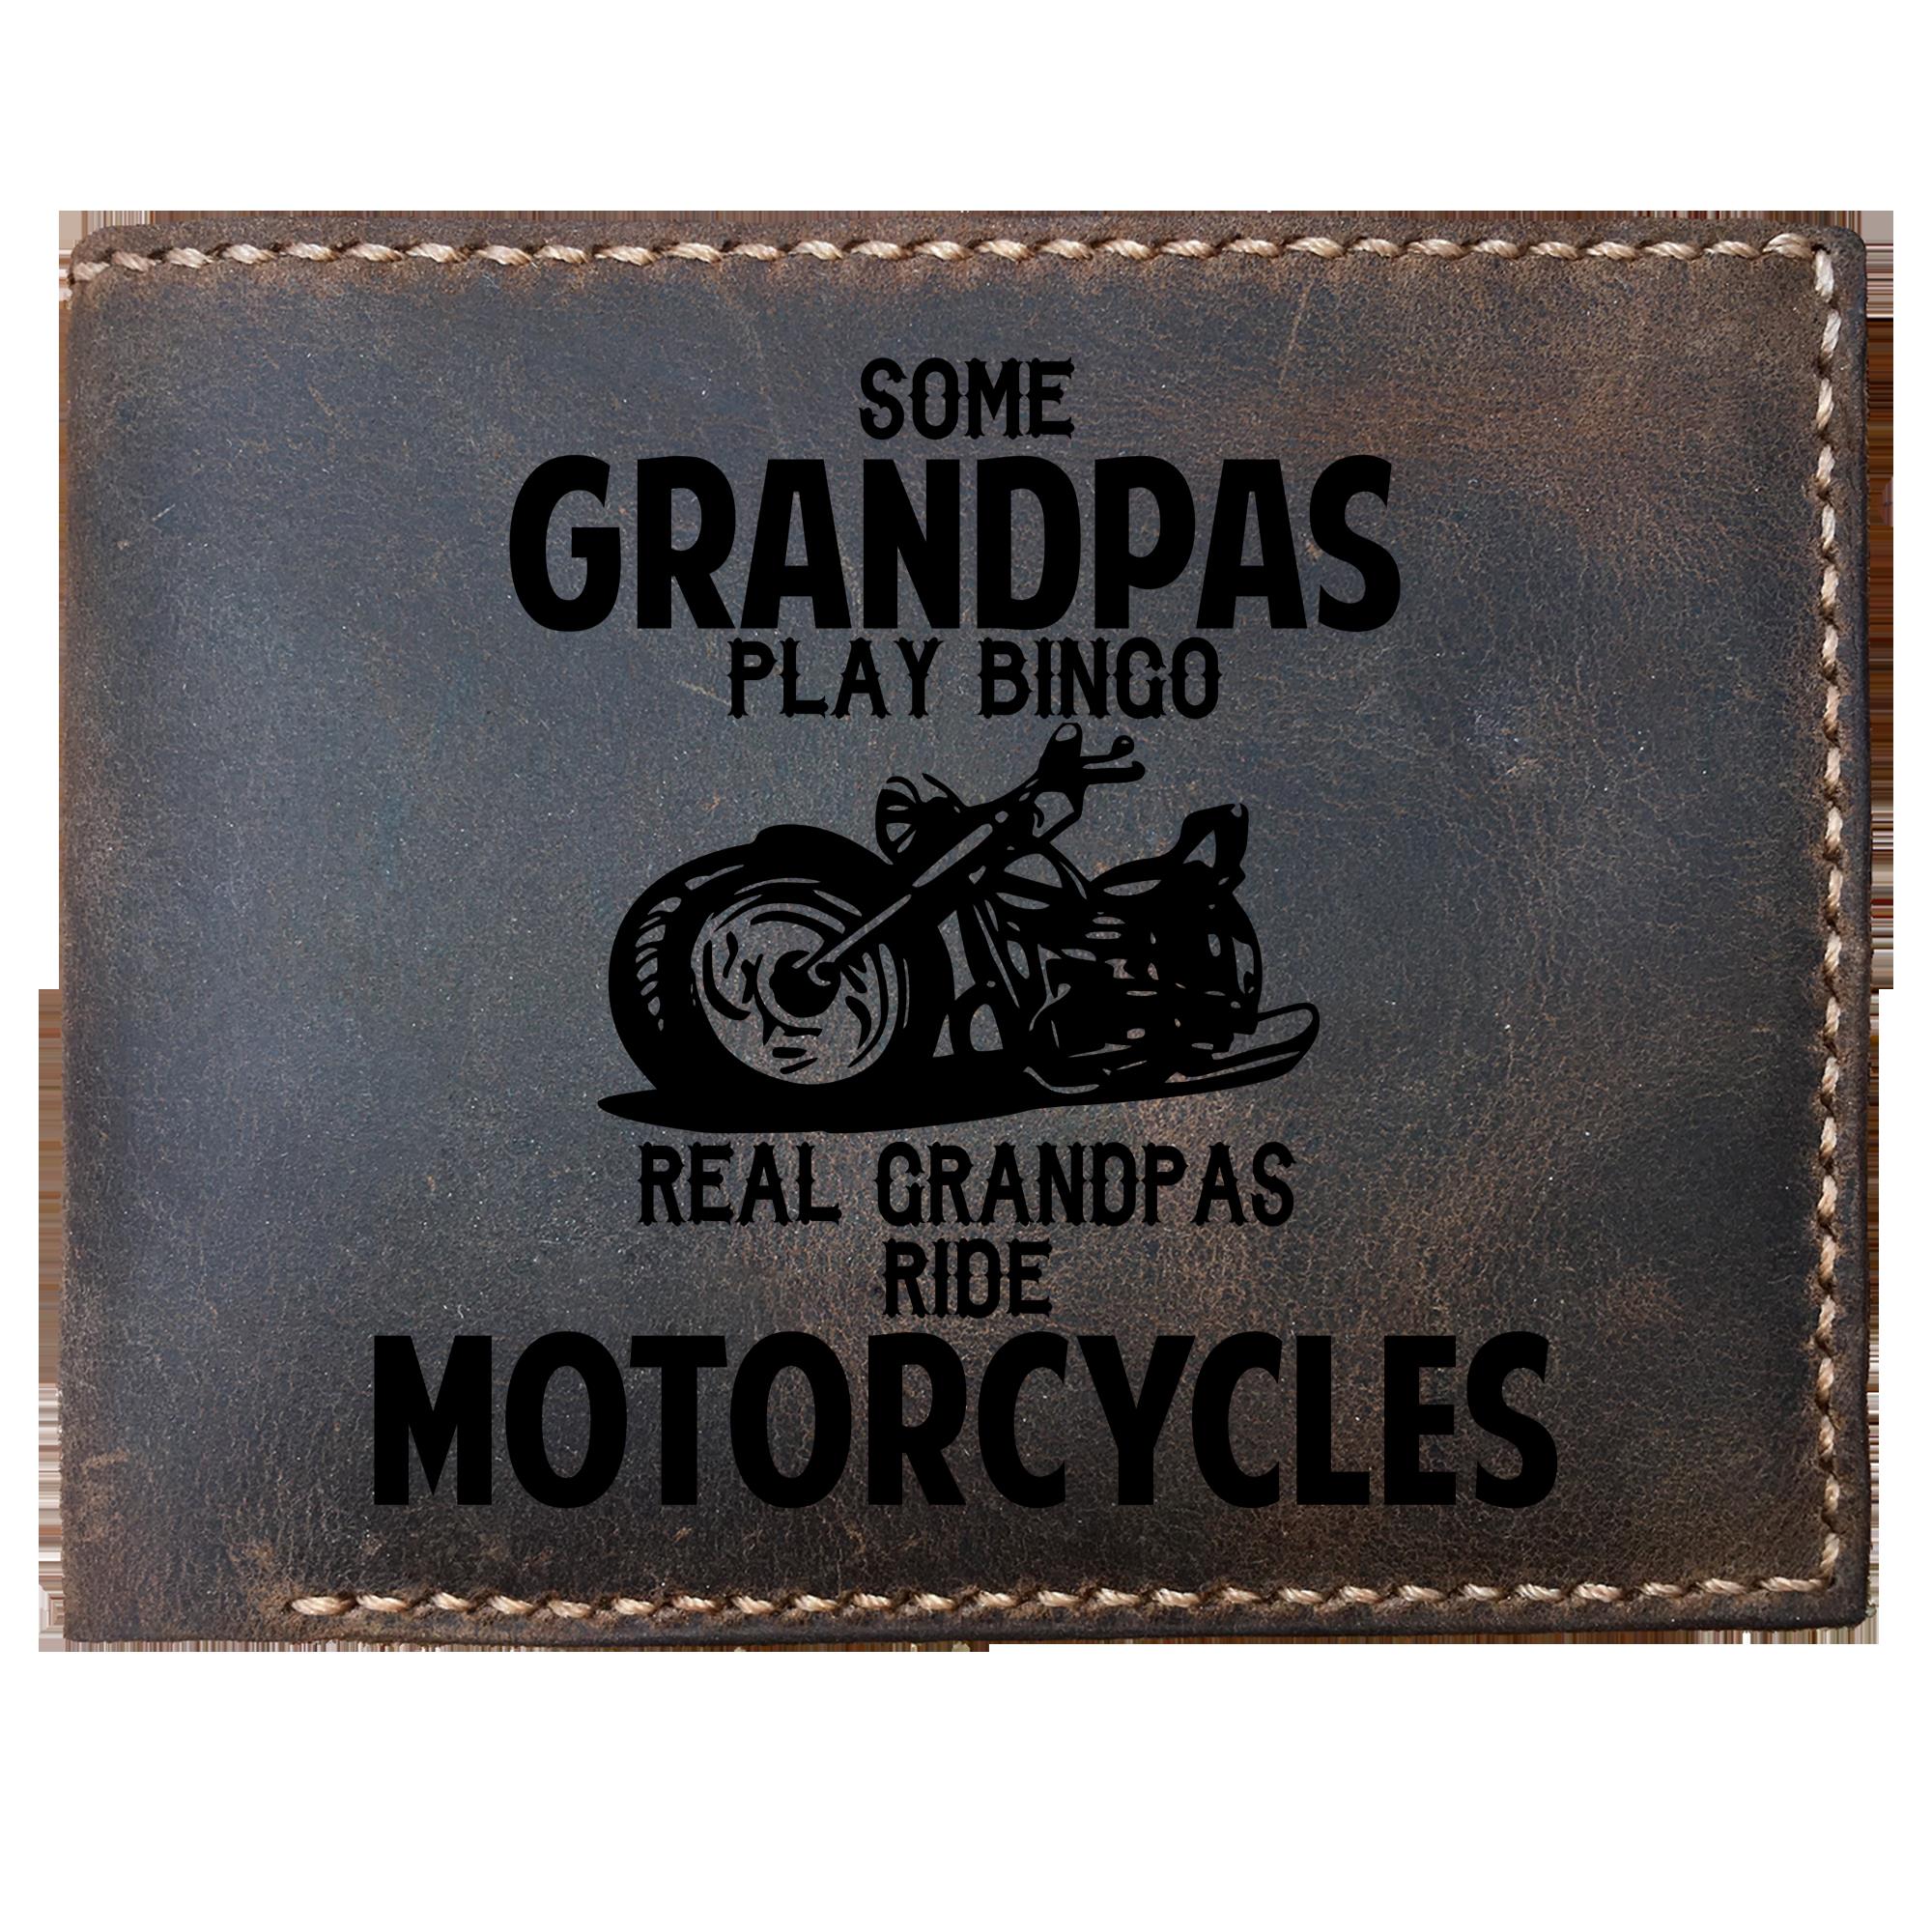 Skitongifts Funny Custom Engraved Bifold Leather Wallet, Some Grandpa's Play Bingo Real Grandpa's Ride Motorcycles. Funny Unique Biker Motorcycle